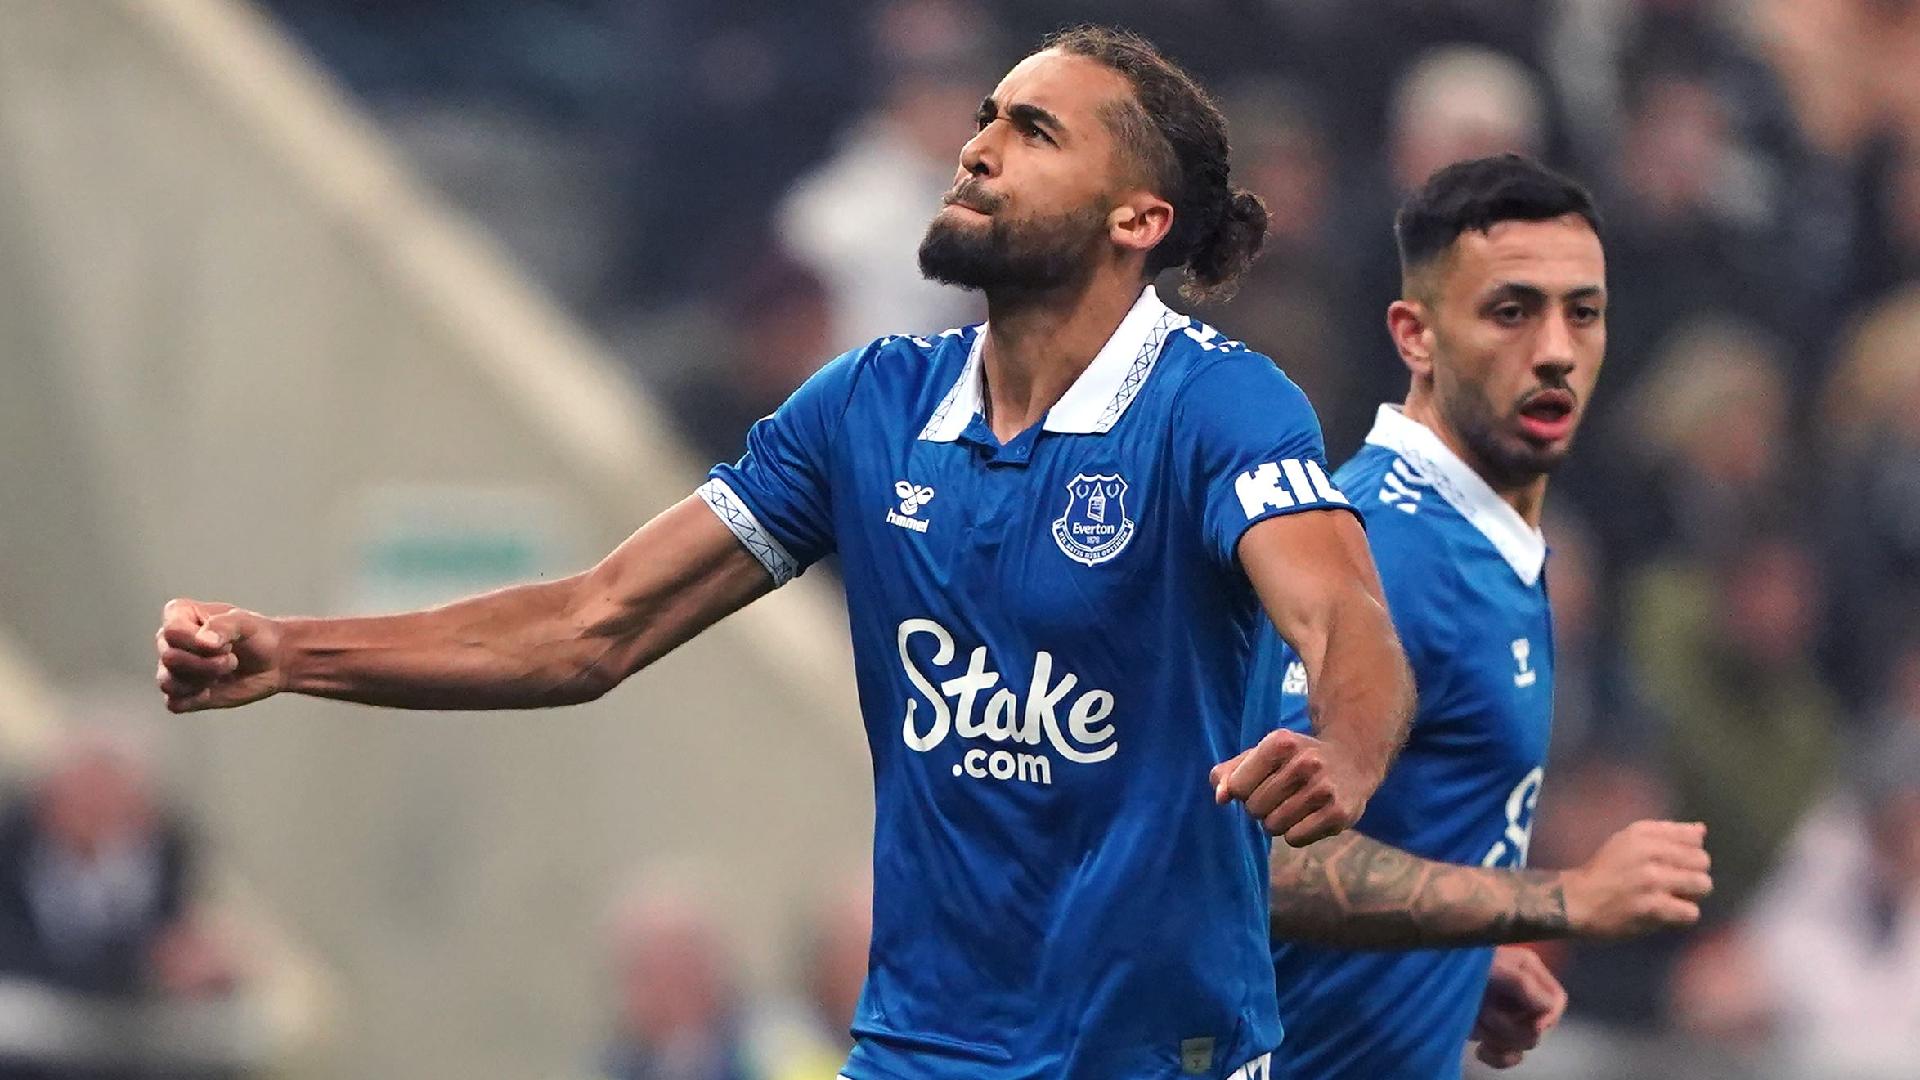 Dominic Calvert-Lewin ends goal drought to earn Everton a point at Newcastle